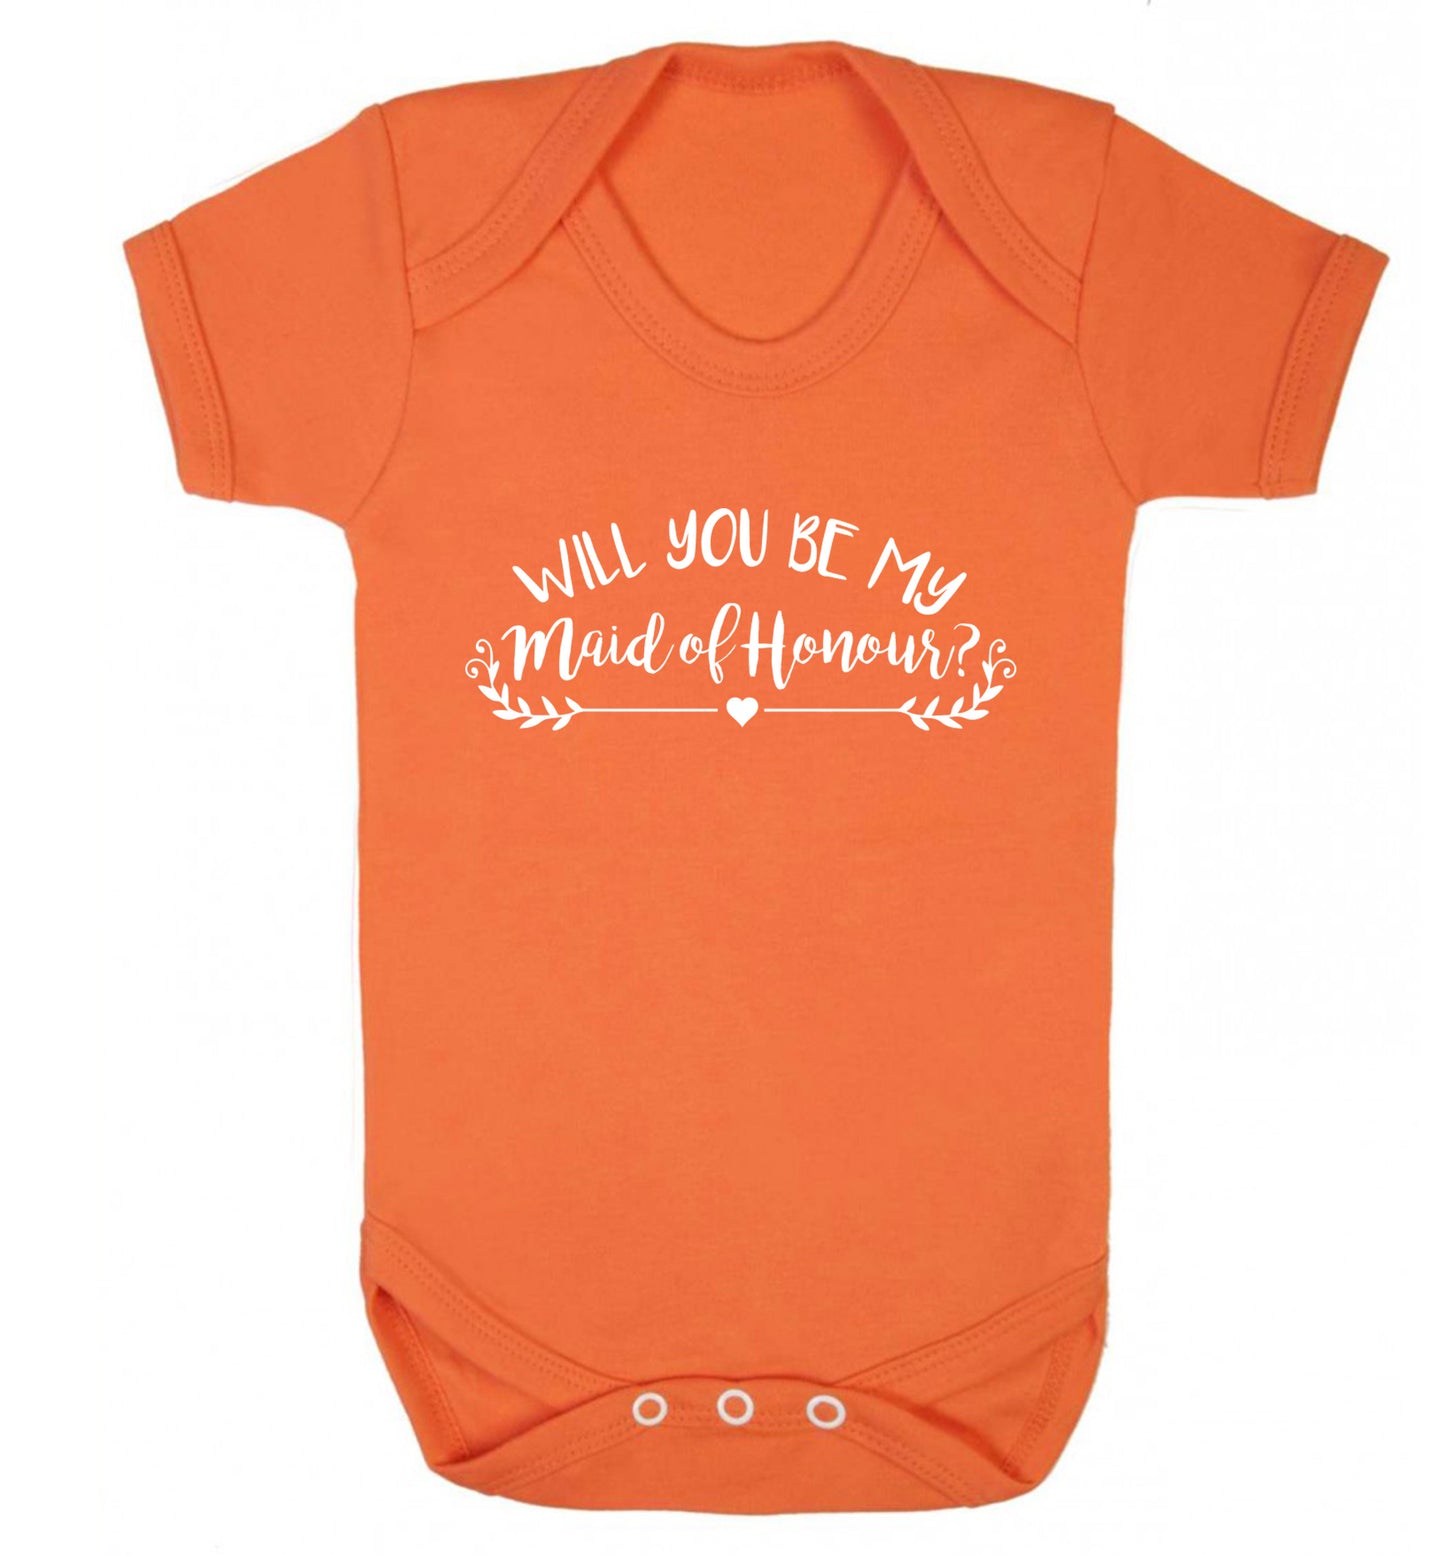 Will you be my maid of honour? Baby Vest orange 18-24 months